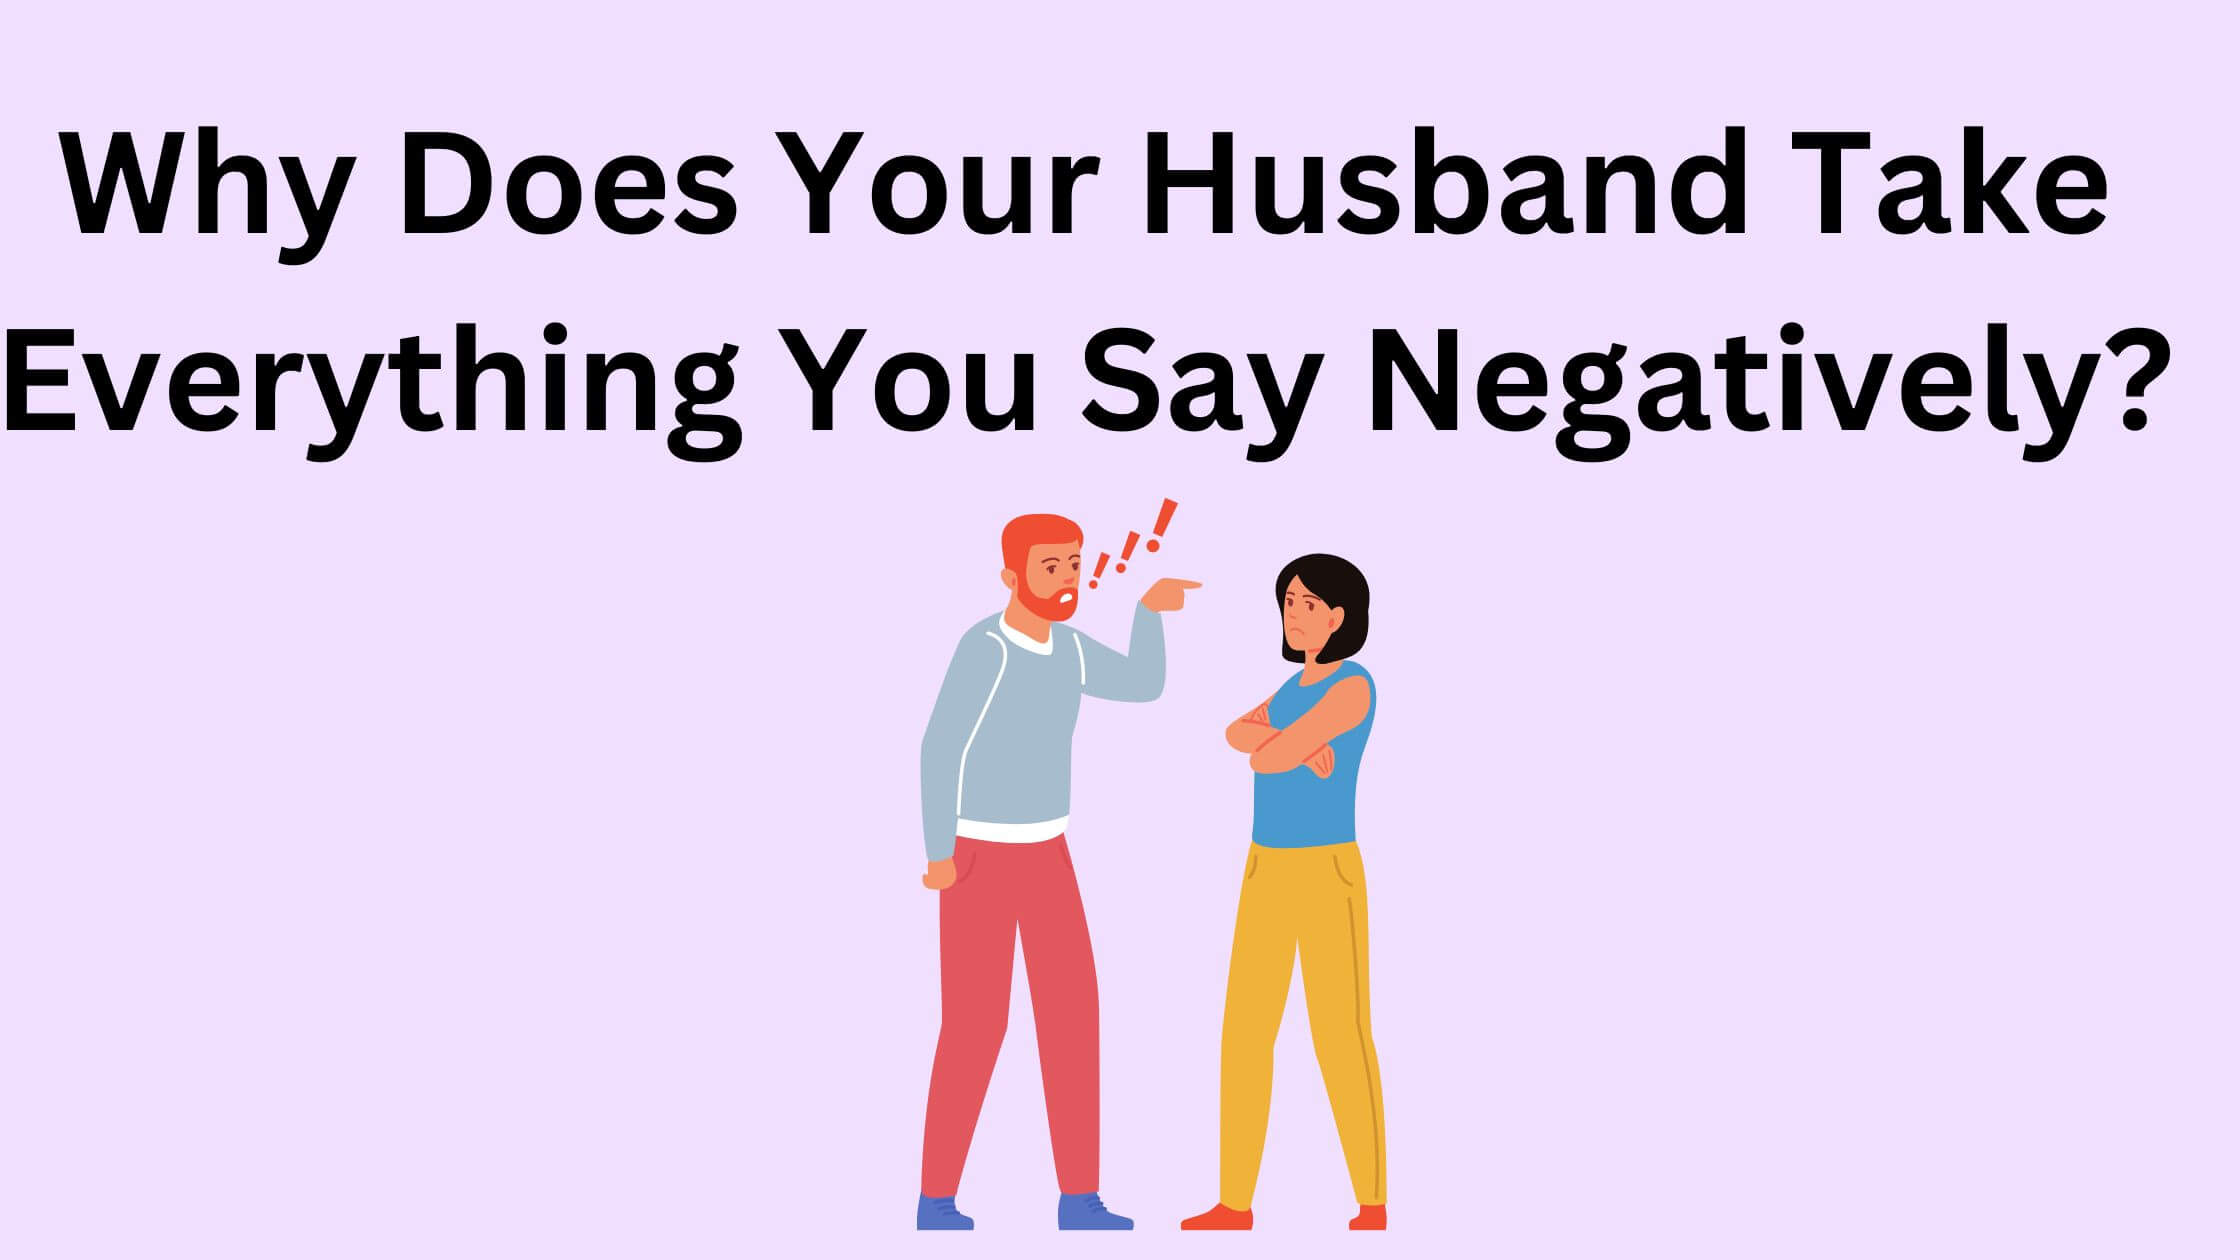 Reasons Why Your Husband Take Everything You Say Negatively?